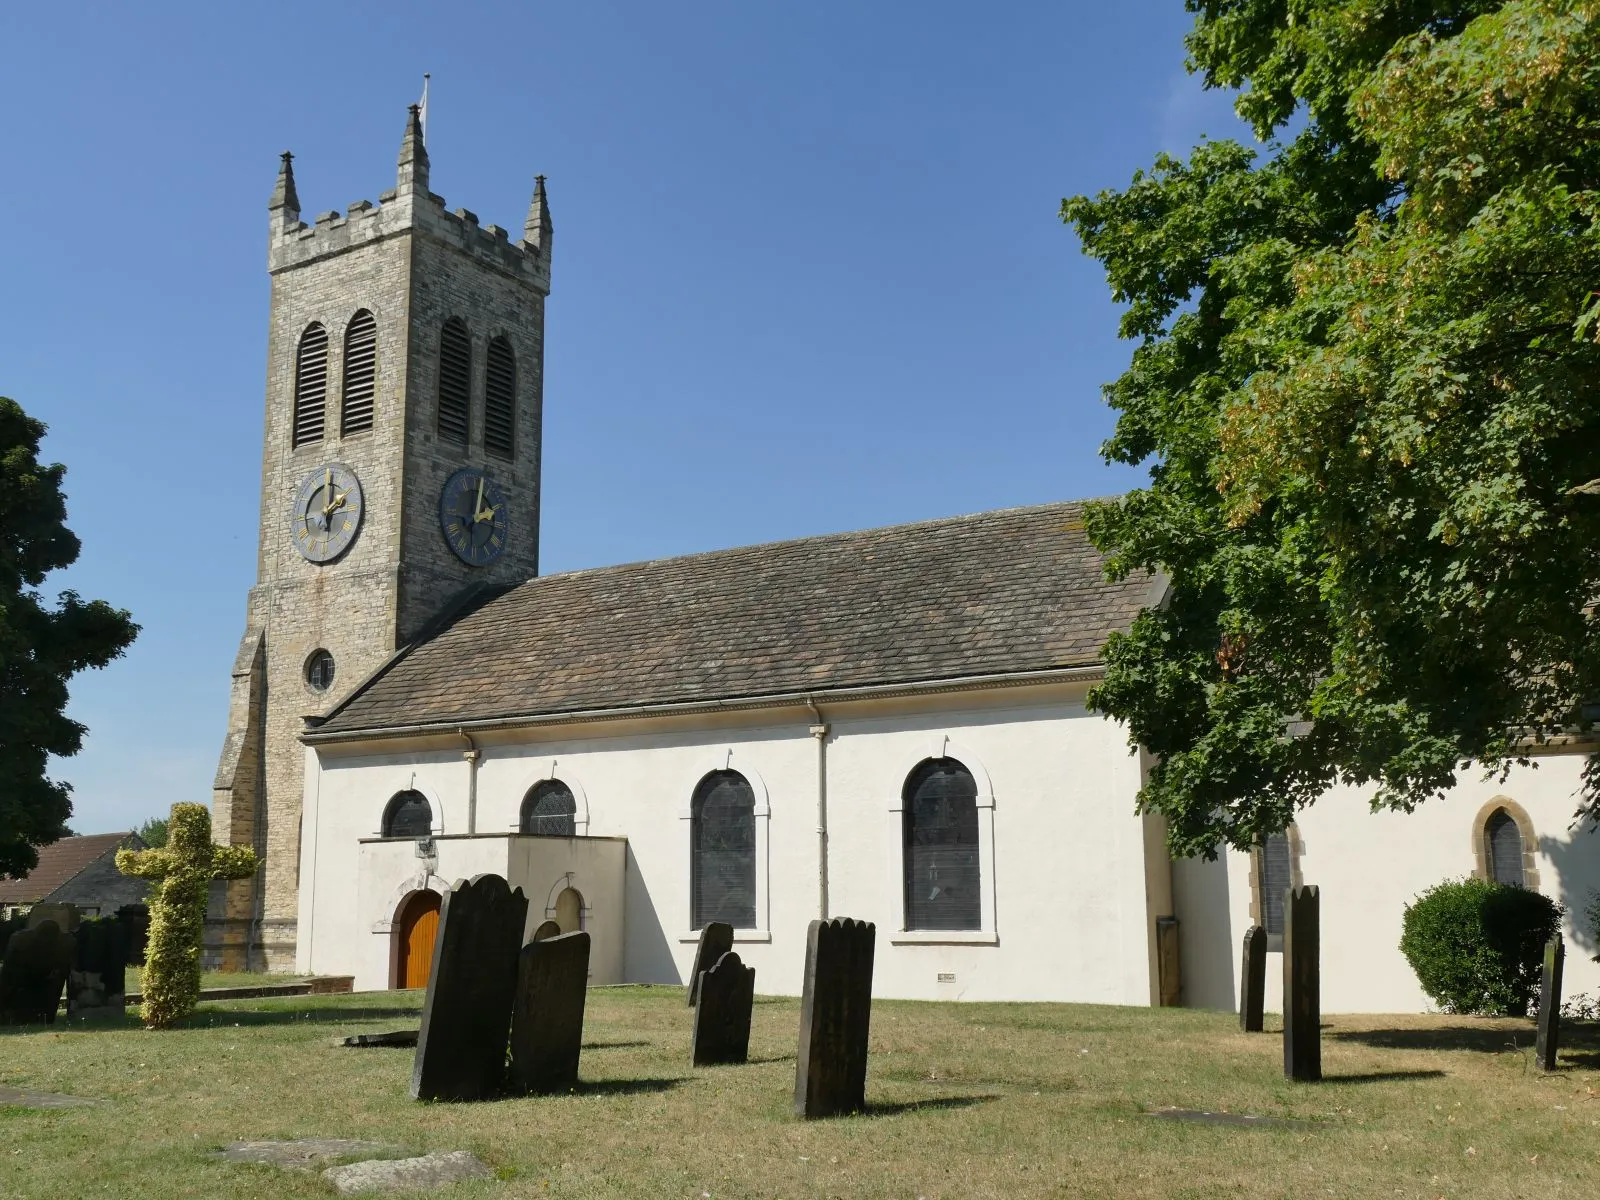 Photo showing: There has been a church here since Norman times (if not earlier), built by Henry de Lacy, Lord of the manor, as chapel of ease to All Saints, Pontefract.
The present church dates from c.1750, initially without a tower. The tower was built in the 1830s after the fashion of that time. It was heightened in 1887 to mark the Golden Jubilee of Queen Victoria along with the rebuilding of the Chancel and removal of the galleries. It had 'tubular' bells initially, but in 1995 these were replaced with a ring of ten conventional bells in memory of Revd Edward Beaumont, Vicar of Knottingley 1954 - 1970 (sources: parish website and HE listing, grade II, entry 1225755).